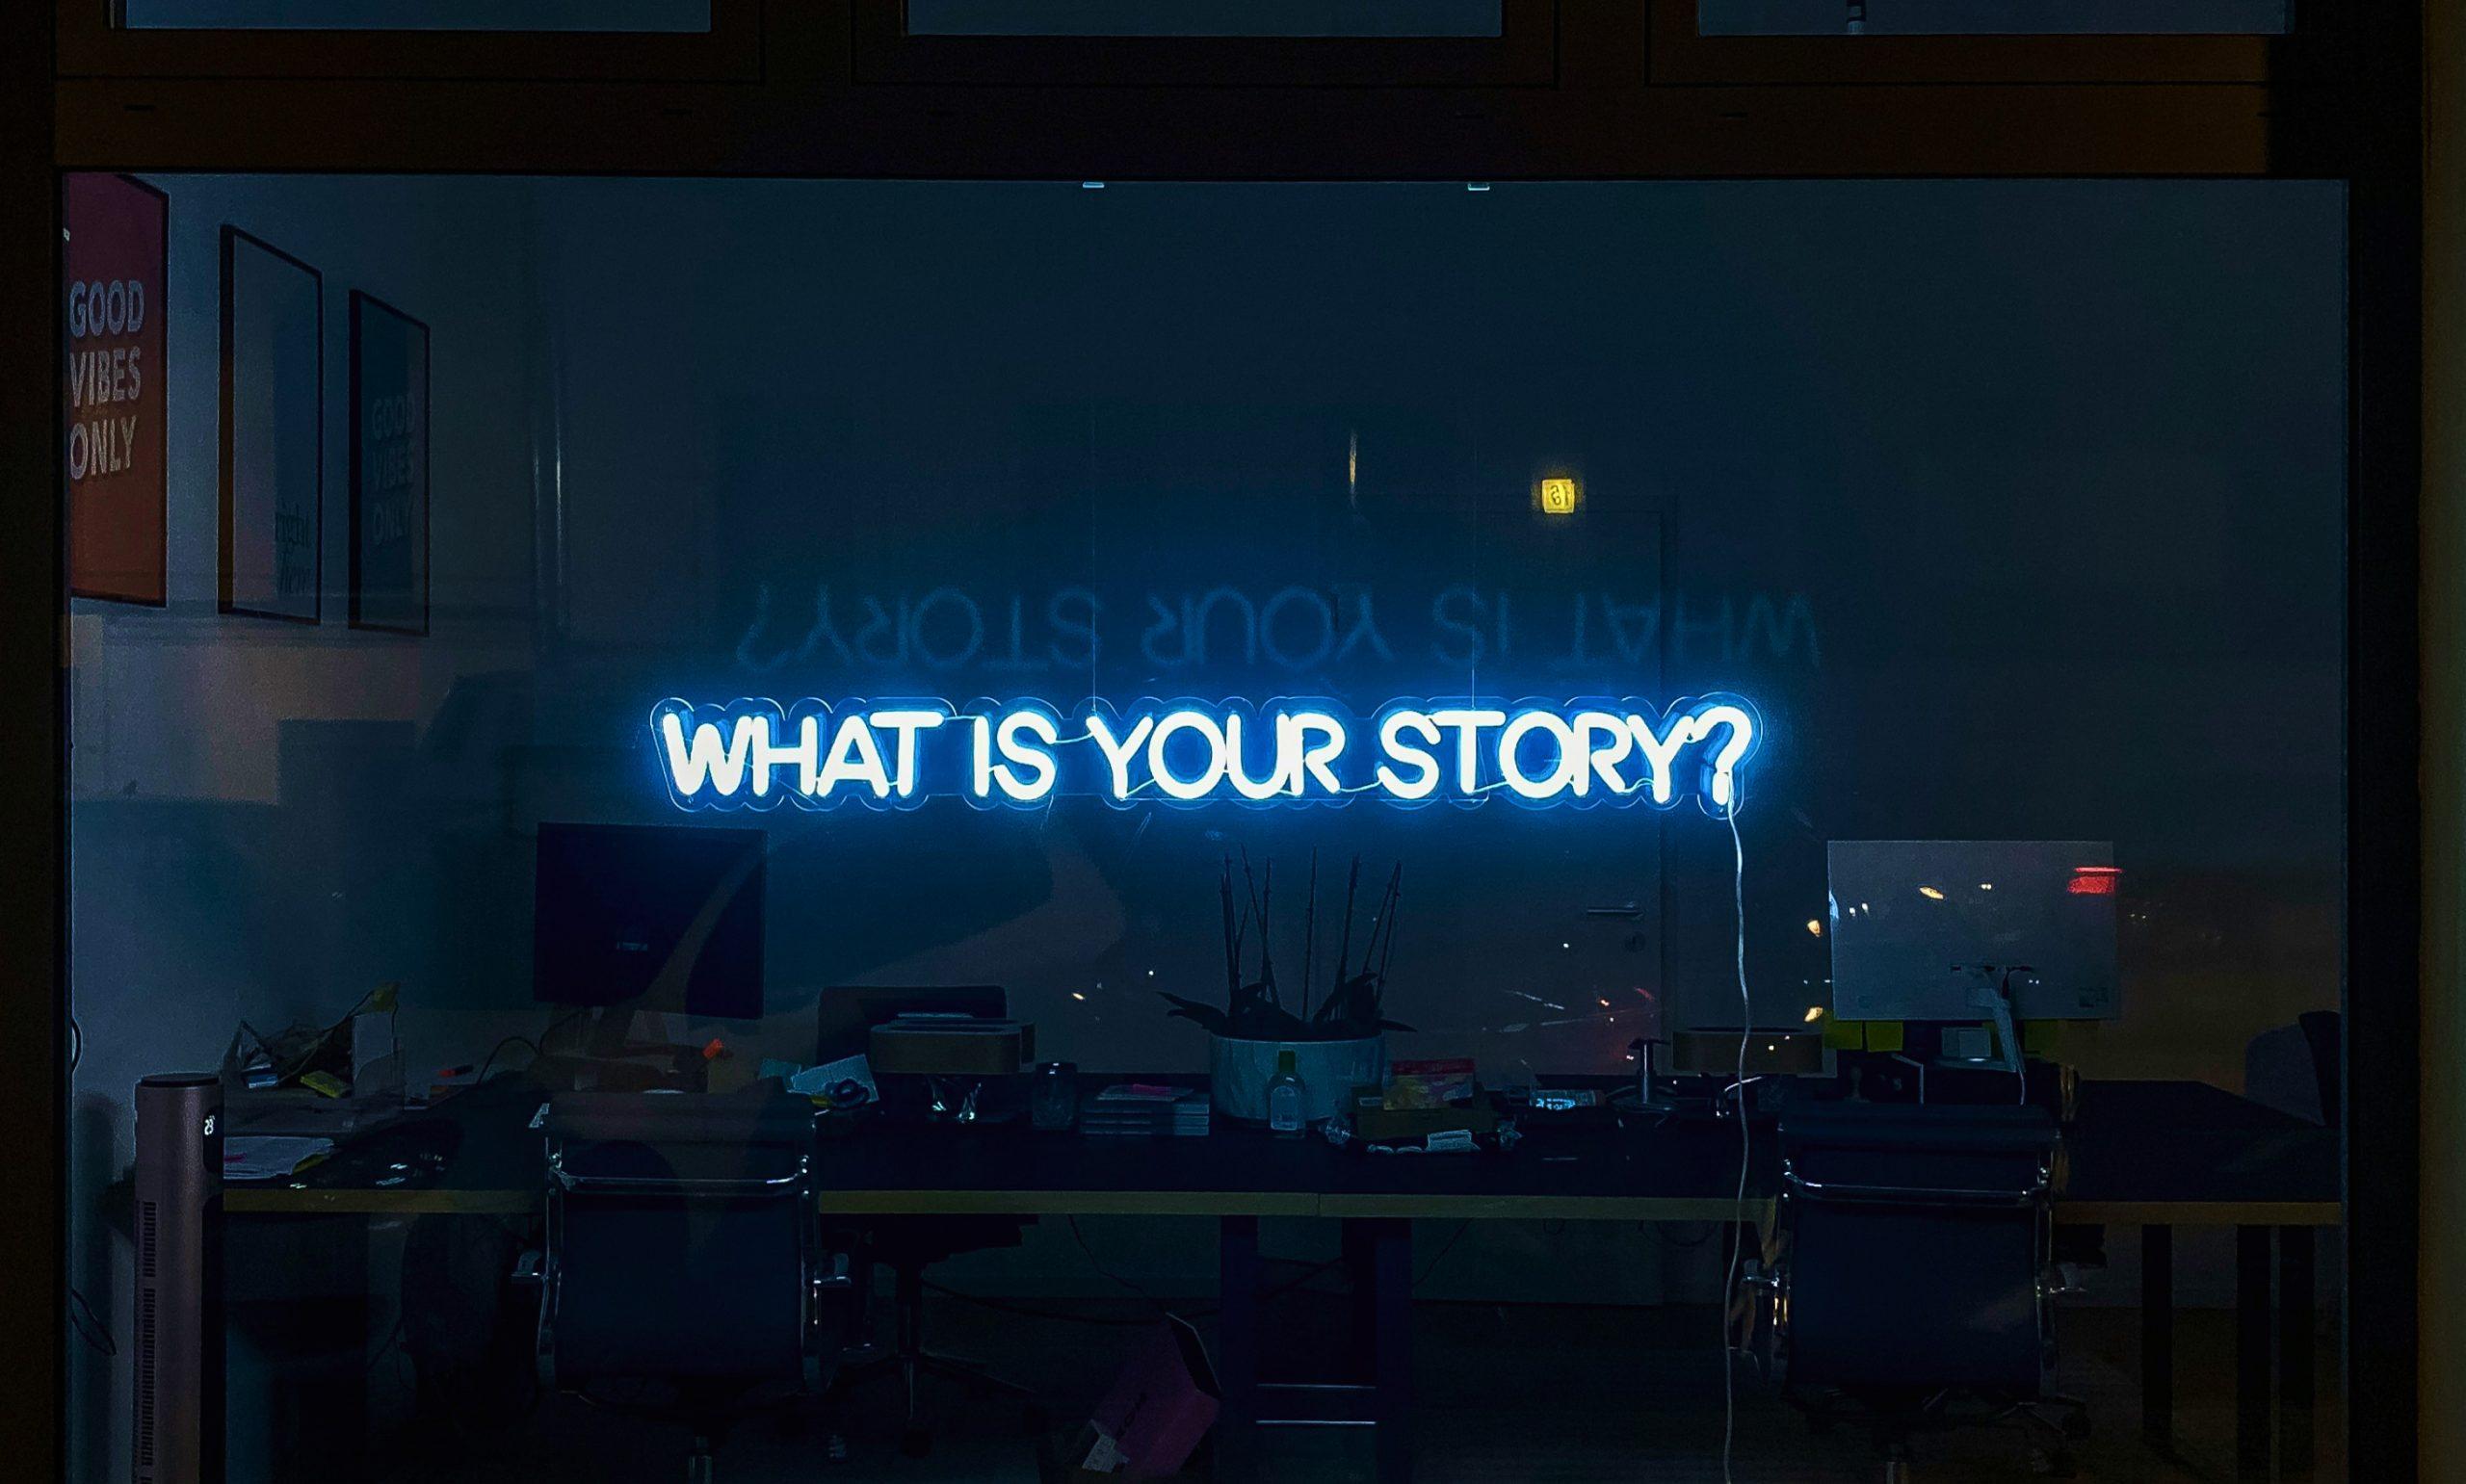 Brand Purpose - Image shows a neon sign reading 'what is your story?'